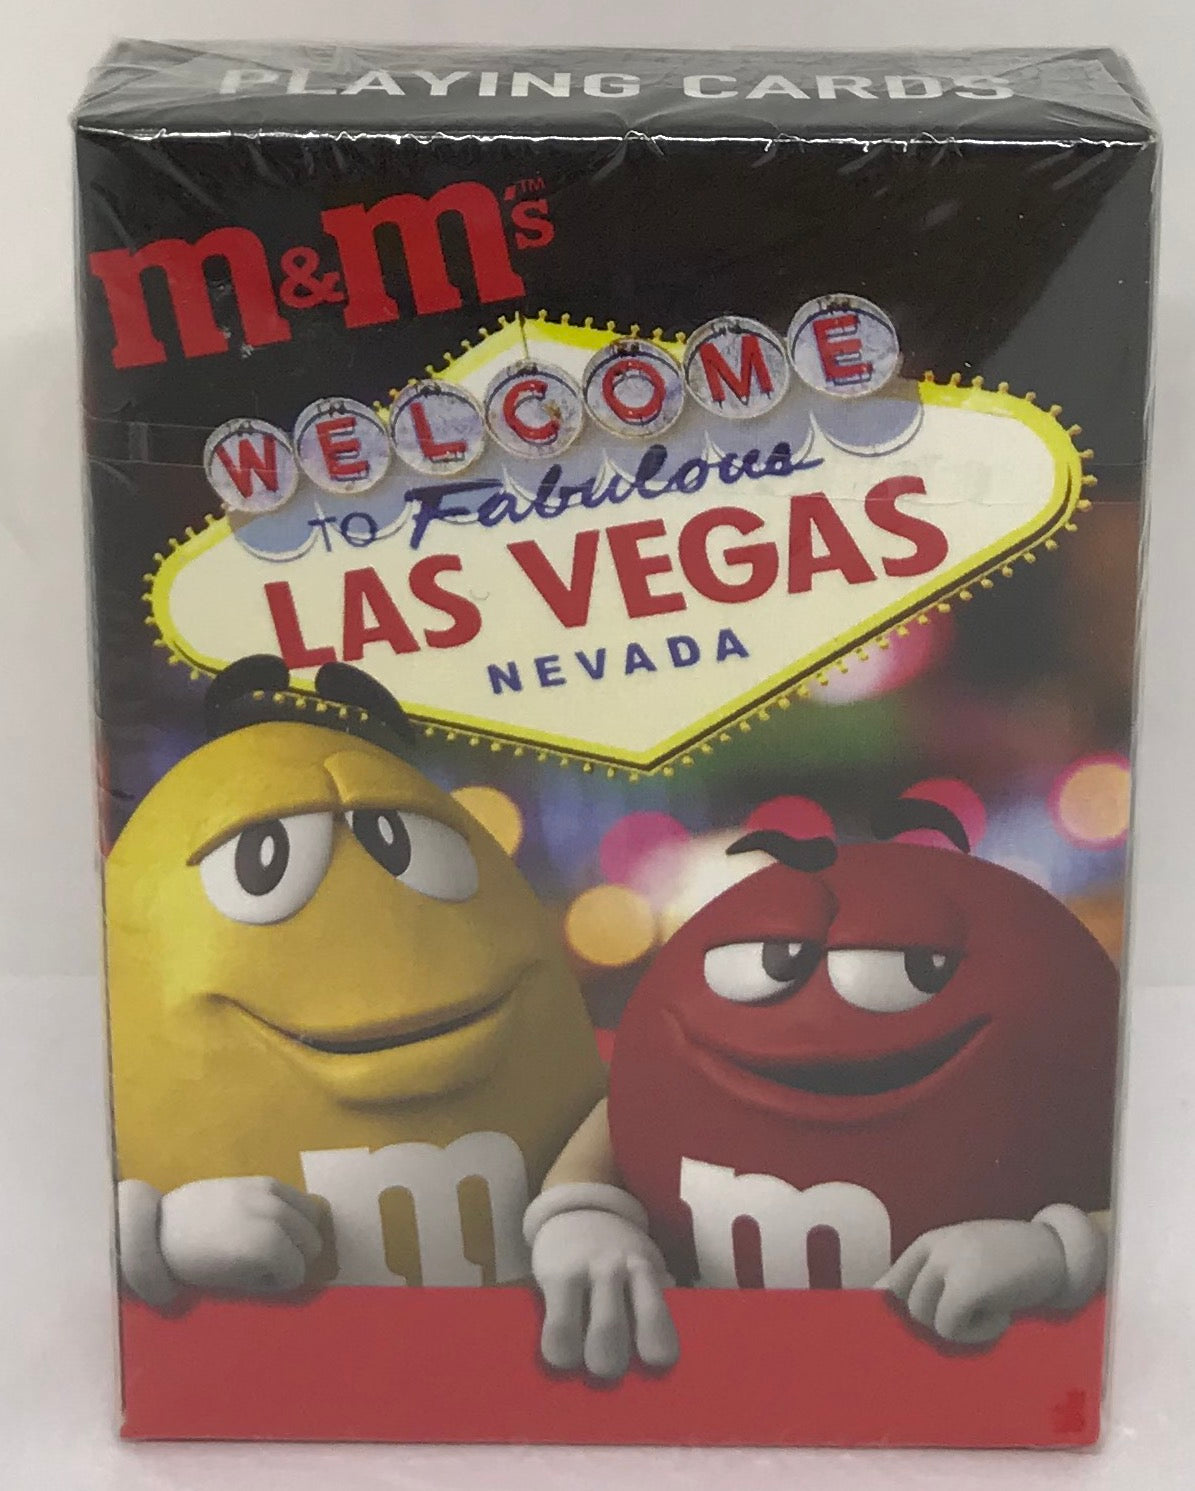 M&M's World Welcome to Fabulous Las Vegas Sign Selfie Playing Cards New with Box